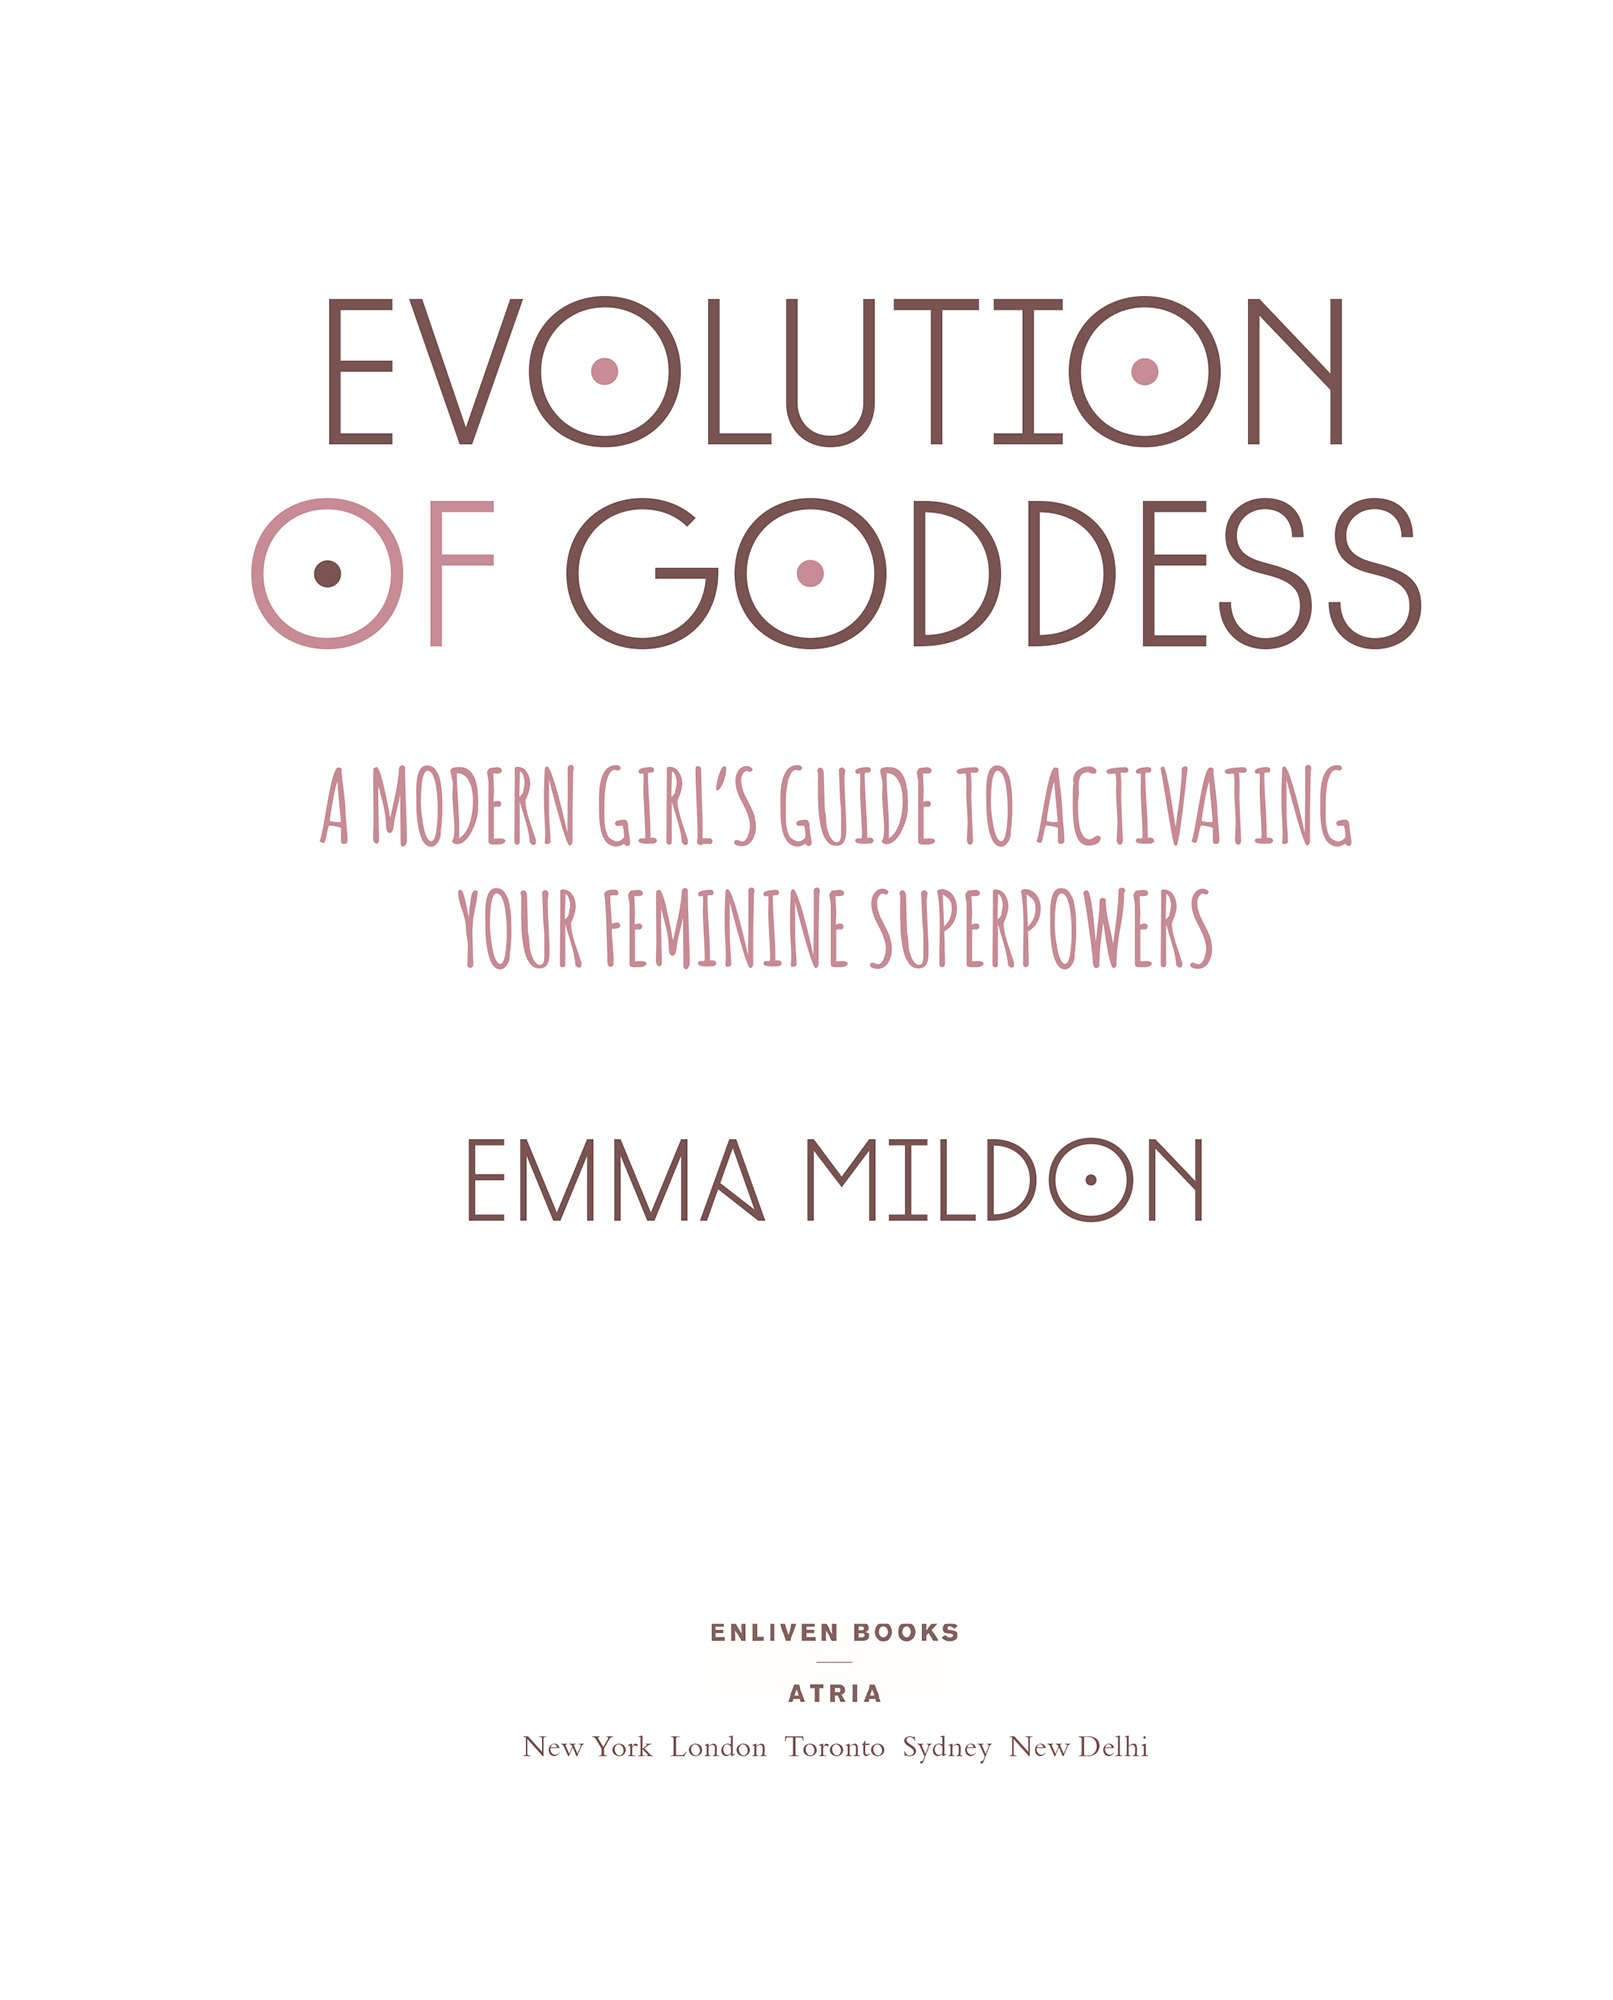 Evolution of goddess a modern girls guide to activating your feminine superpowers - image 2